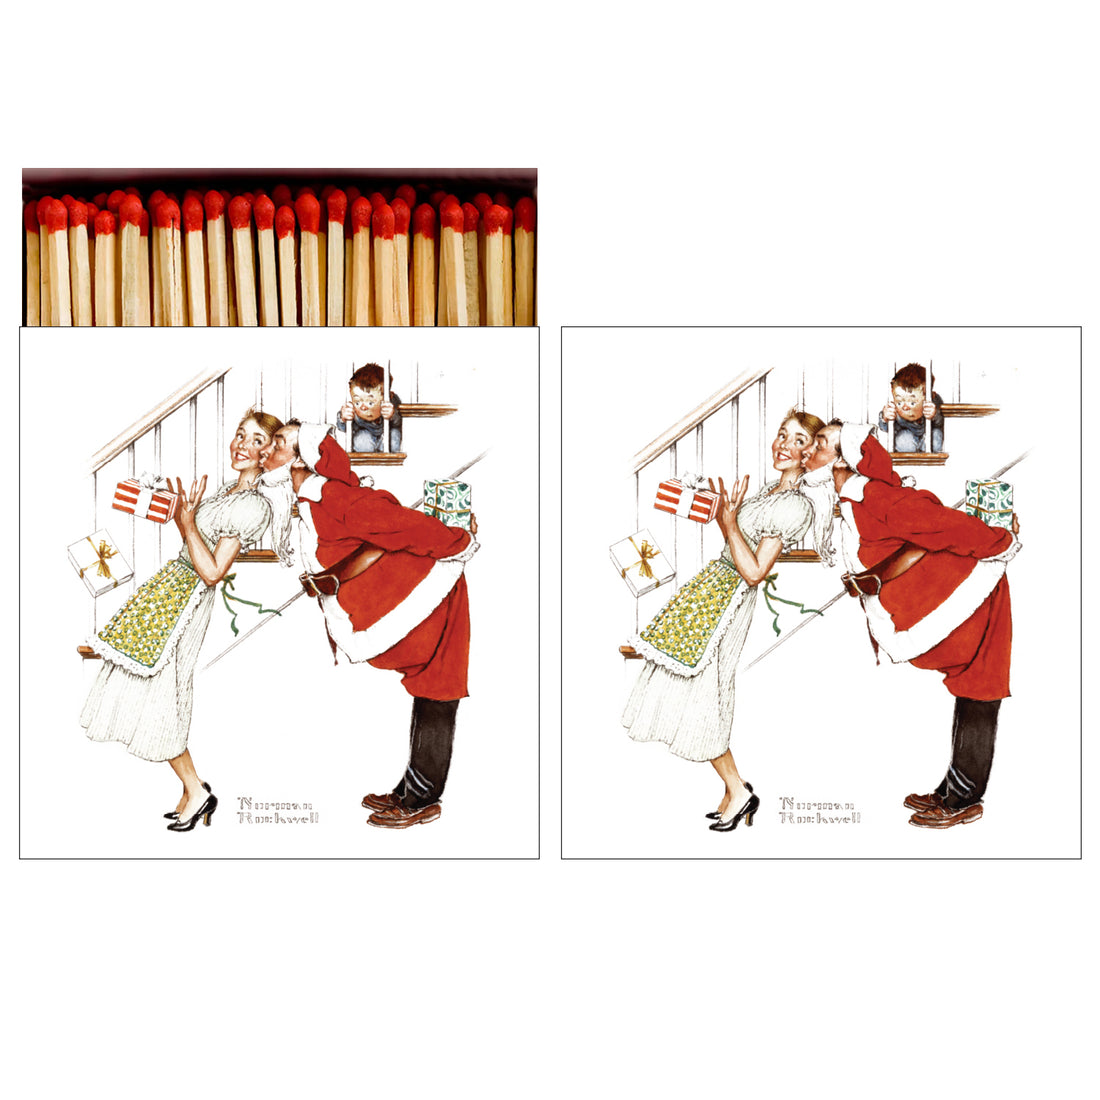 Two identical sides of a square match box, the left of which is open slightly to reveal the matches inside. The artwork on the box depicts a dad dressed as Santa Clause giving his wife a smooch on the cheek, while their young son watches from the staircase, illustrated by Norman Rockwell on a white background.